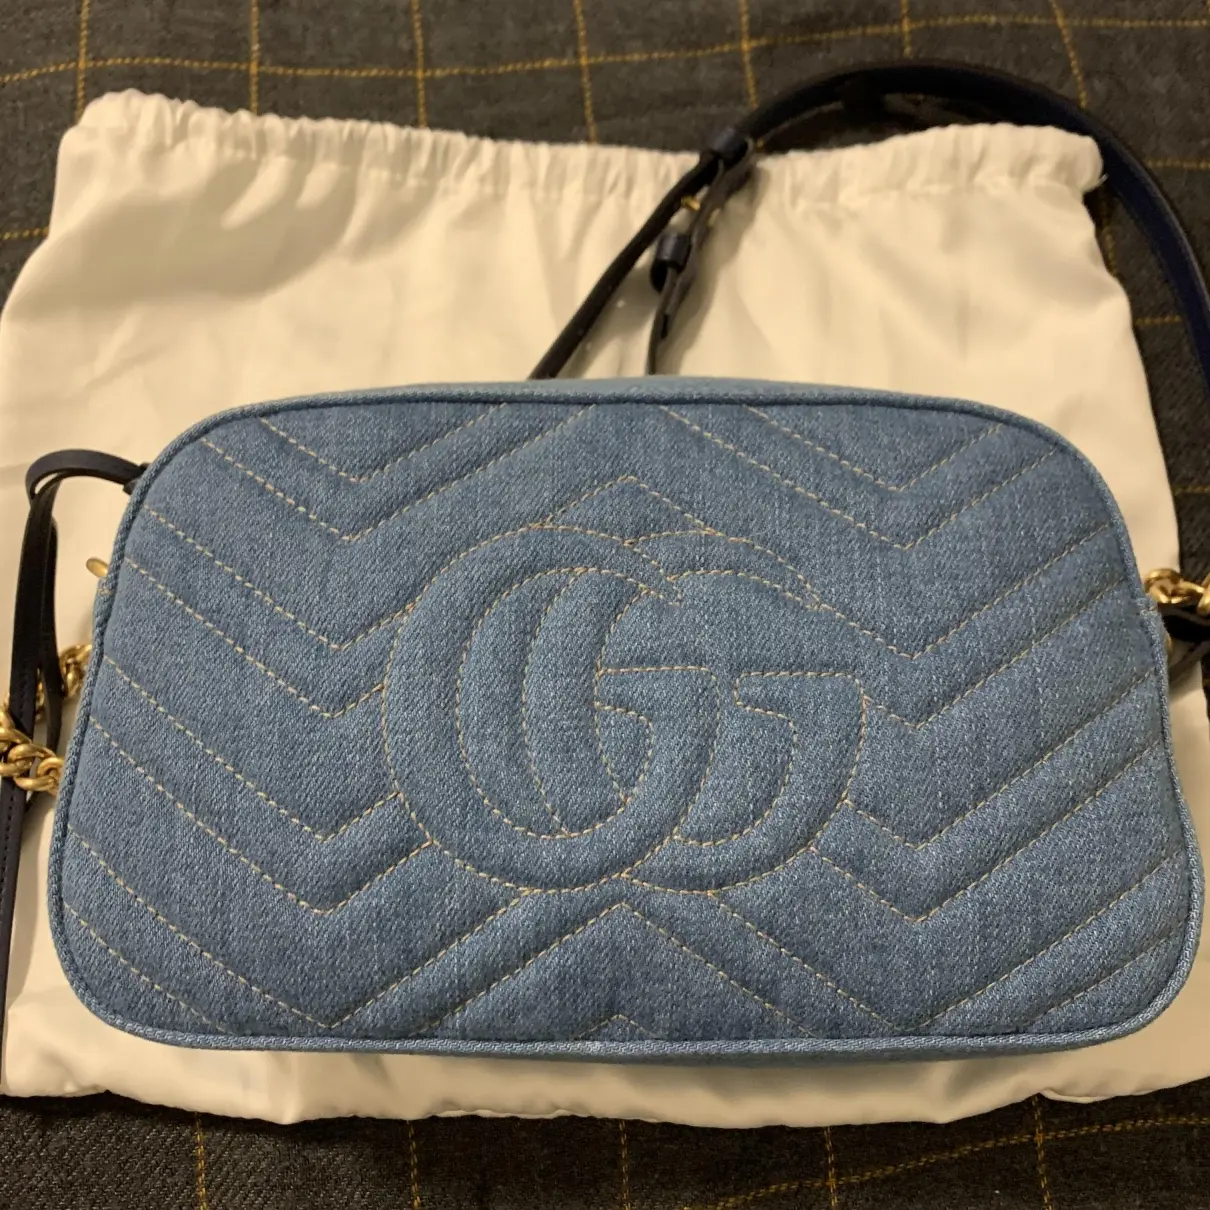 Gucci Pearly GG Marmont crossbody bag for sale